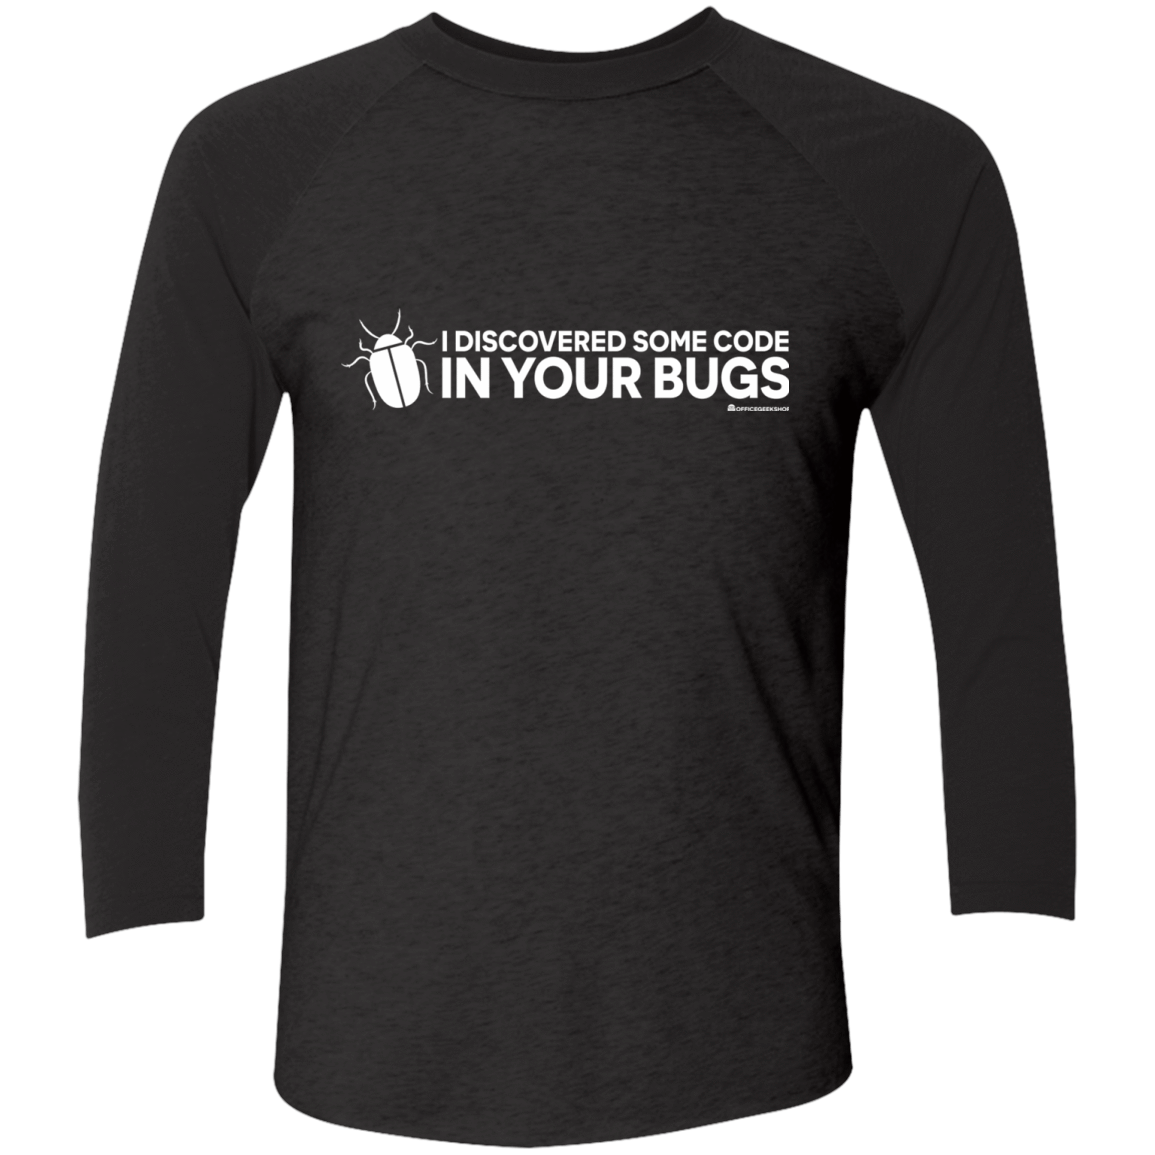 T-Shirts Vintage Black/Vintage Black / X-Small I Discovered Some Code In Your Bugs Men's Triblend 3/4 Sleeve